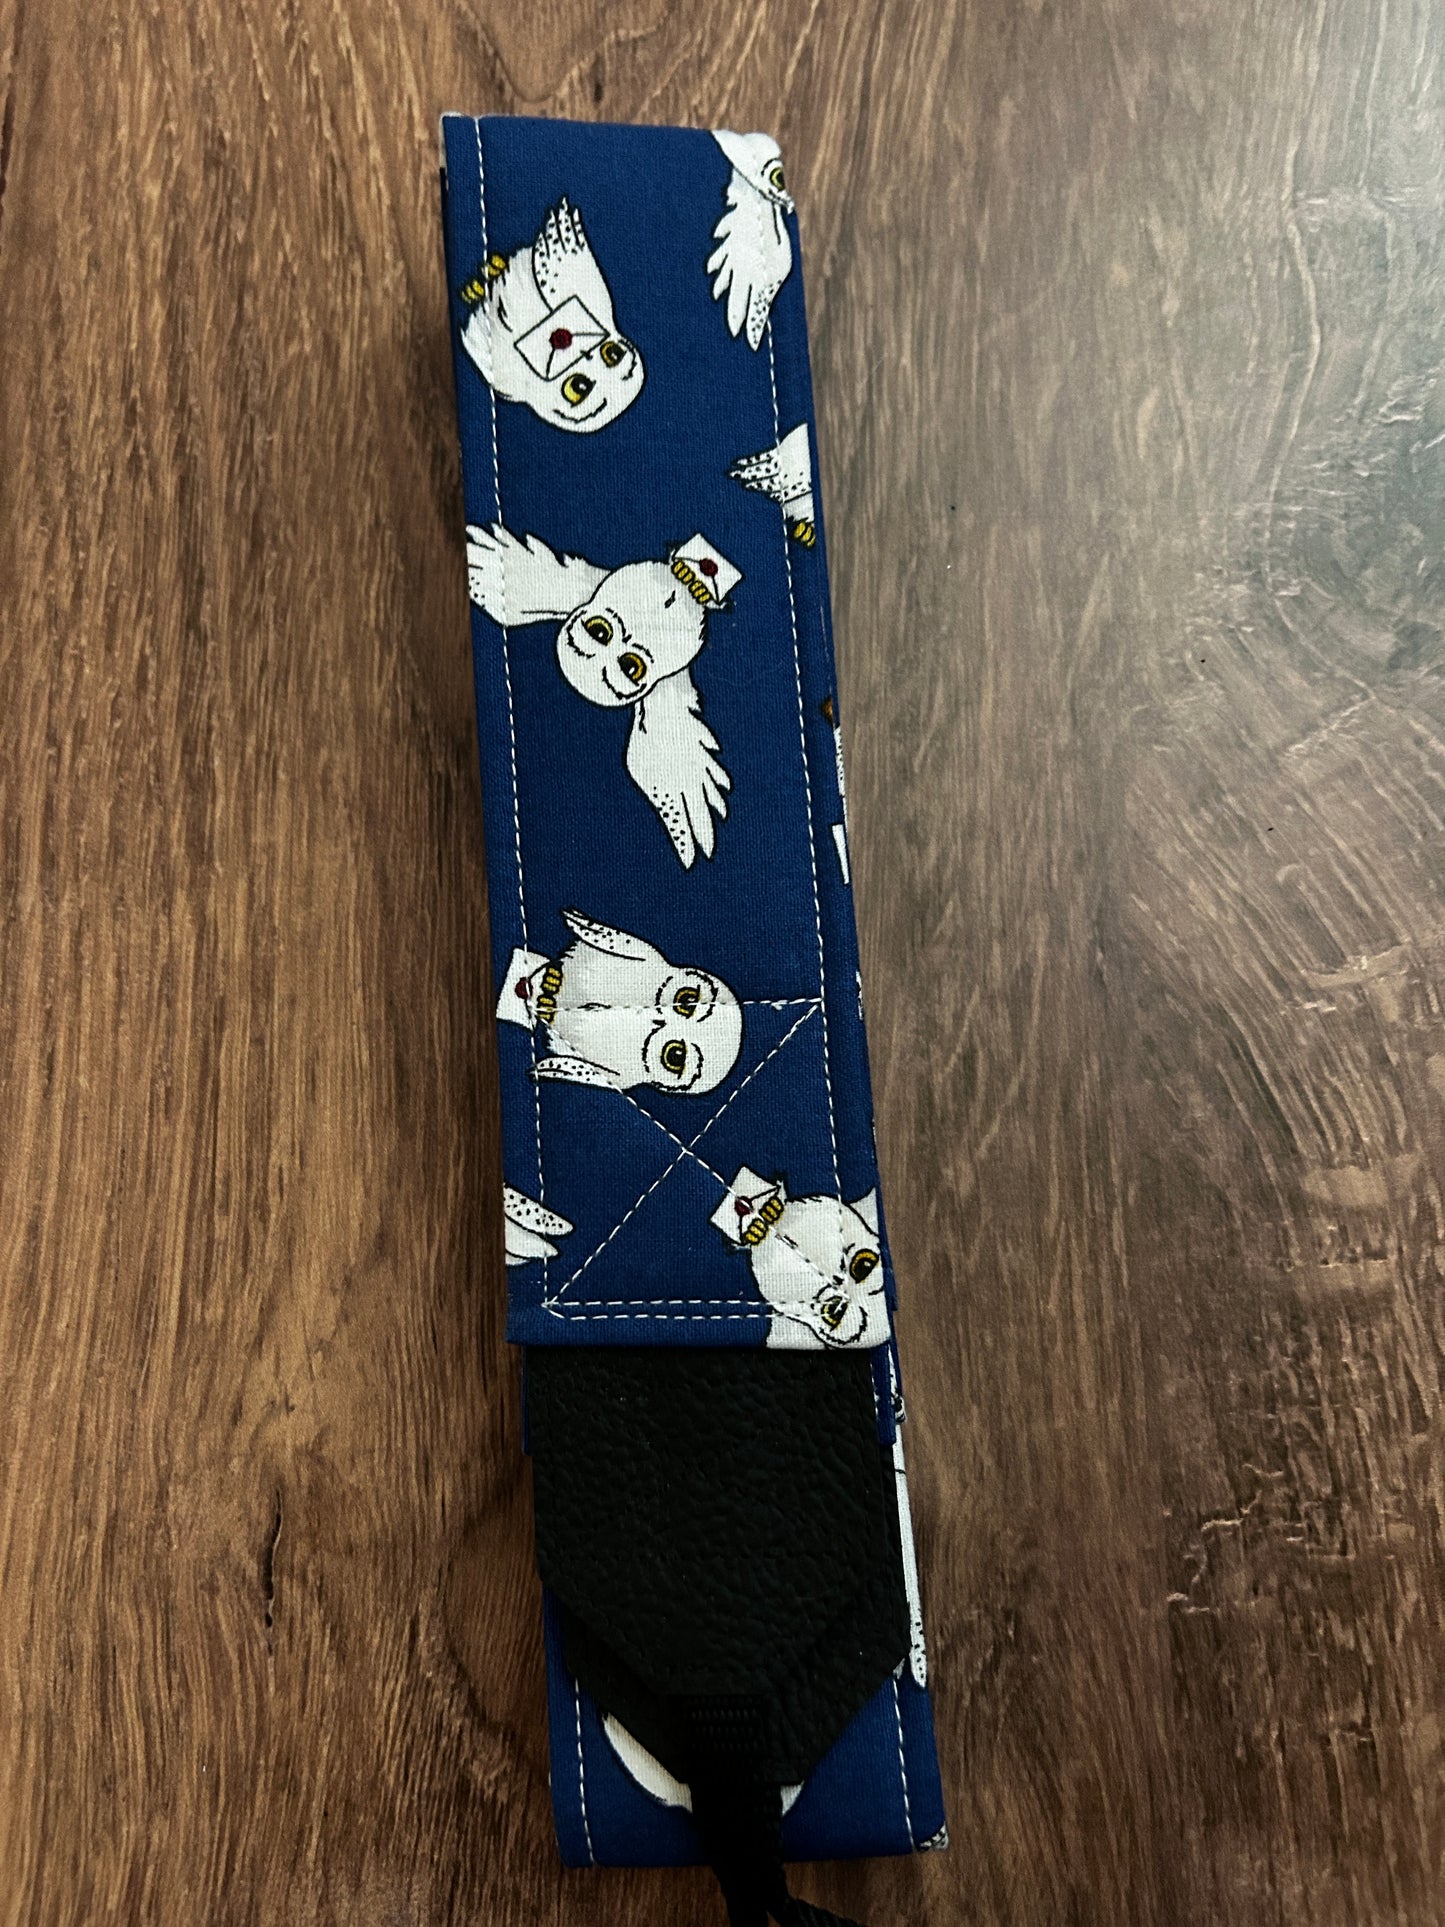 Owl Adjustable Handmade Fabric Camera Strap - DSLR Strap - Photography Accessories - Gift